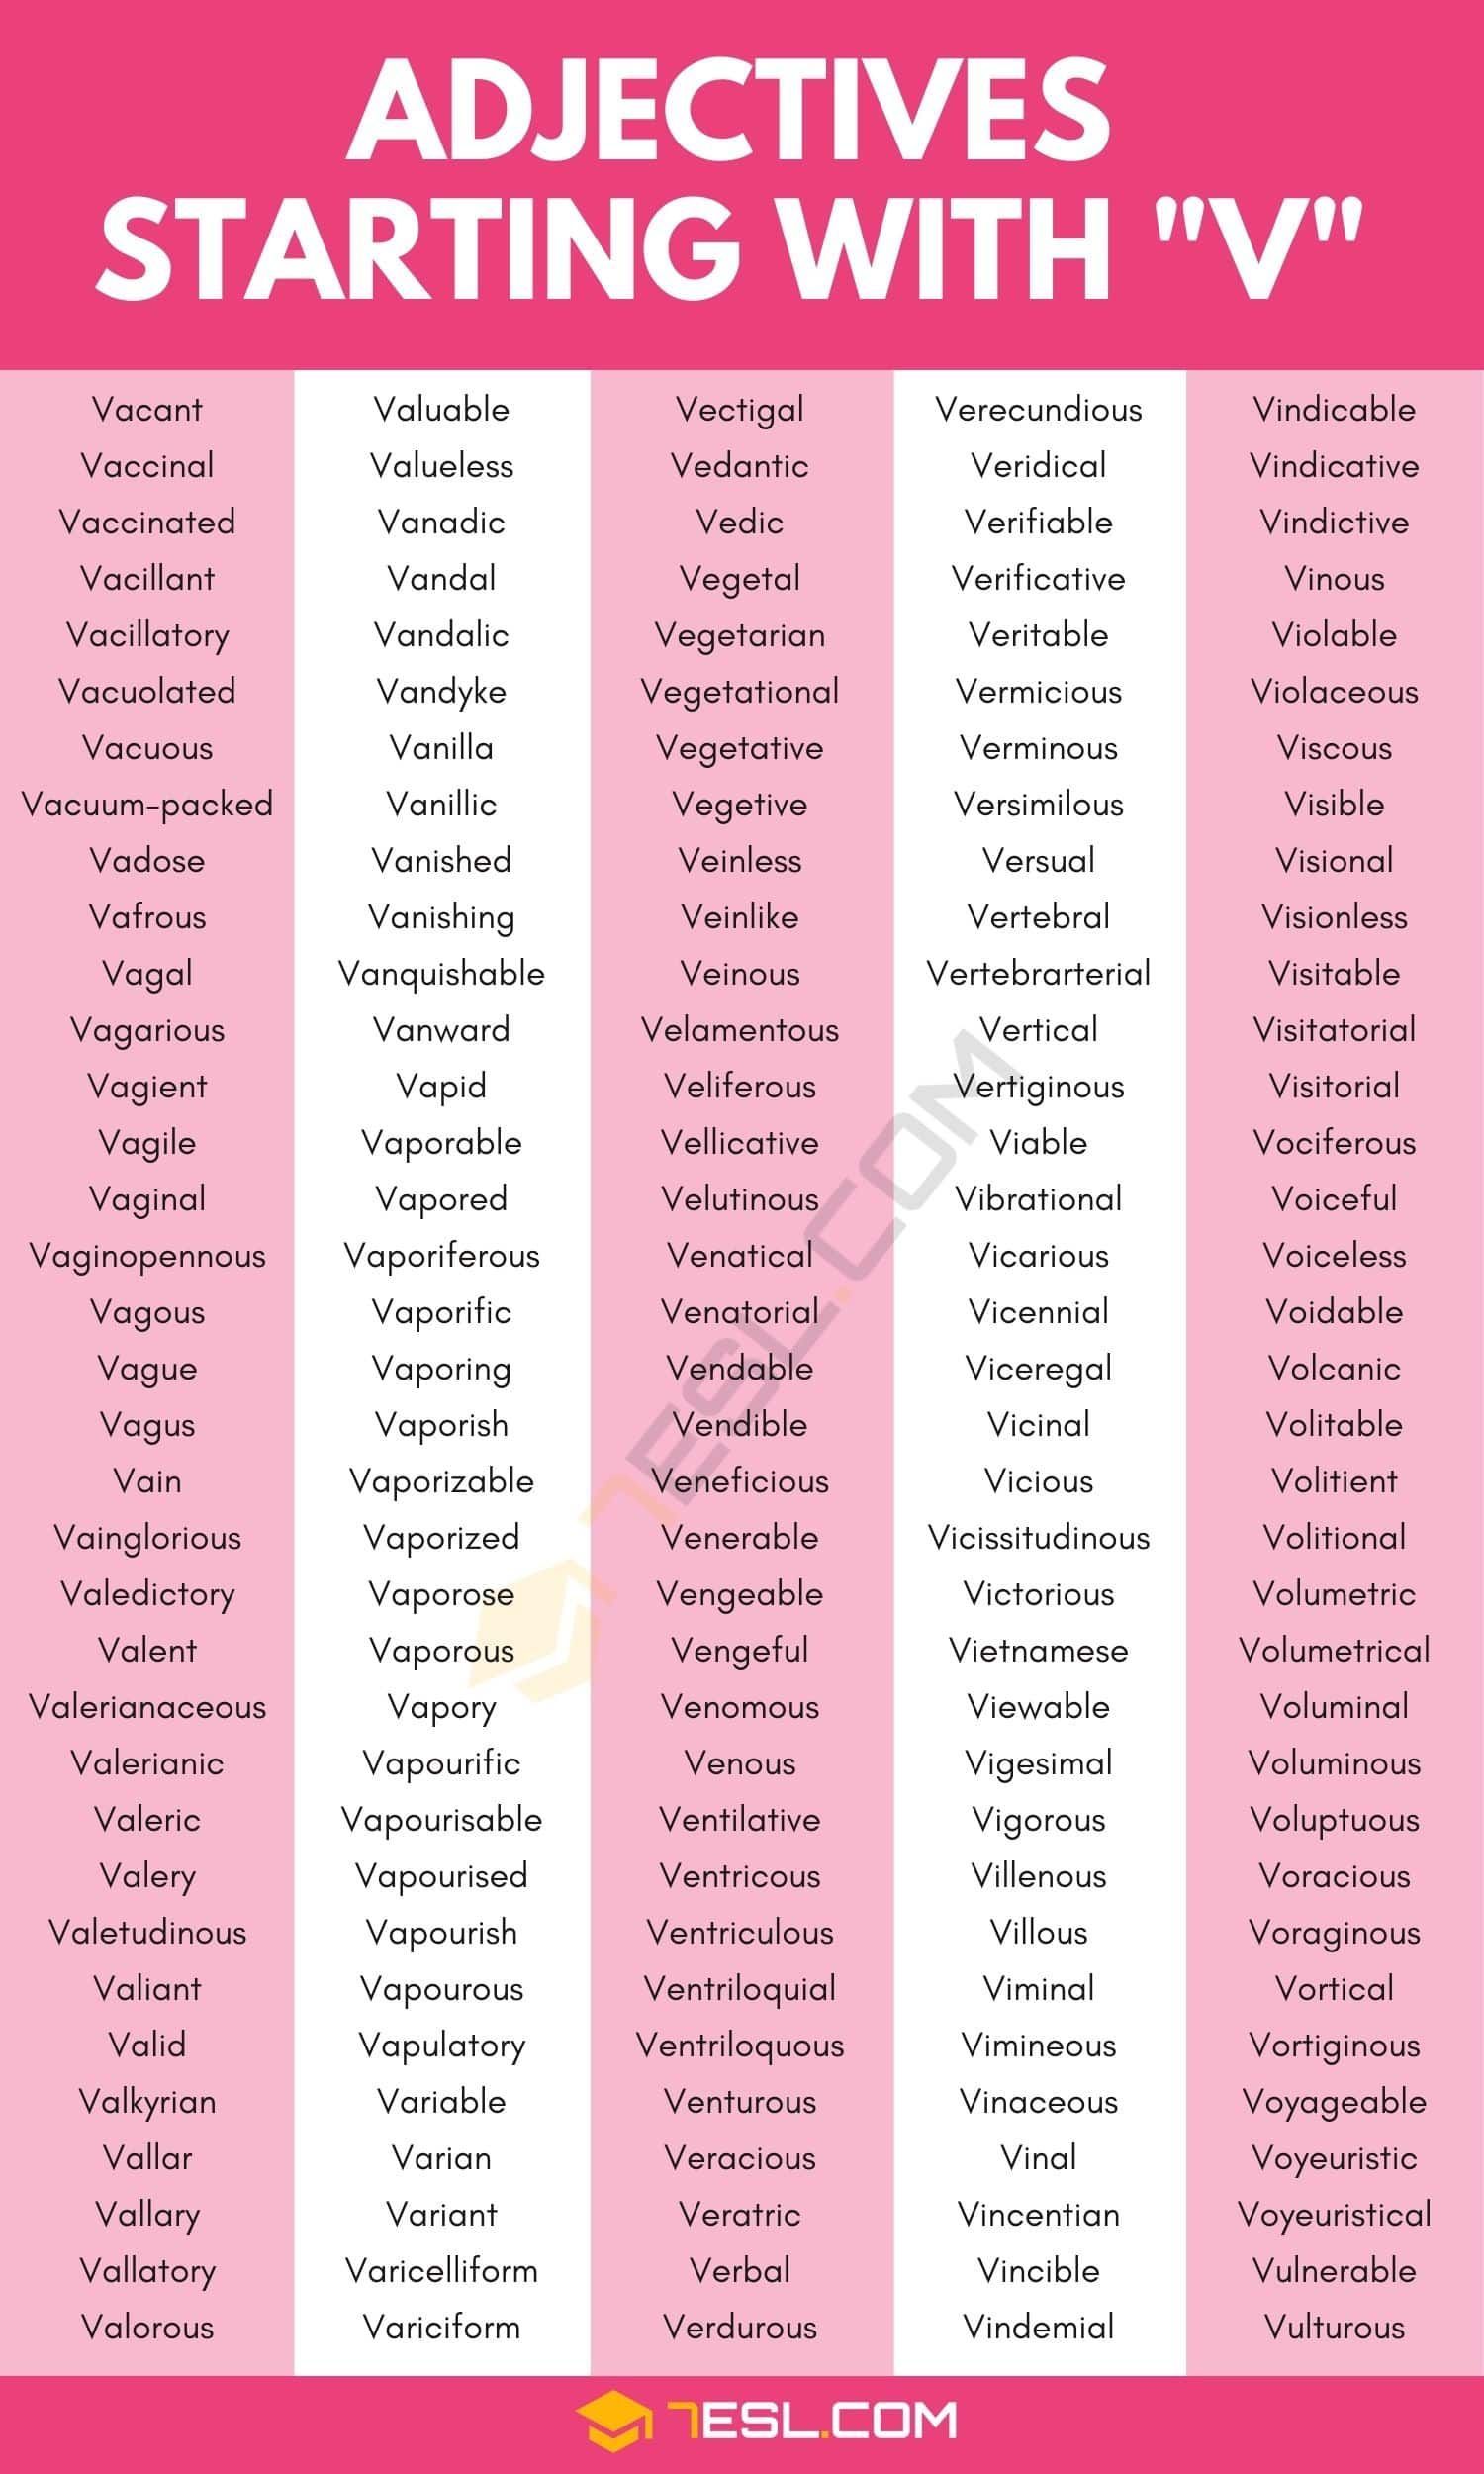 Adjectives that Start with V: 300+ Adjectives Starting with V 3